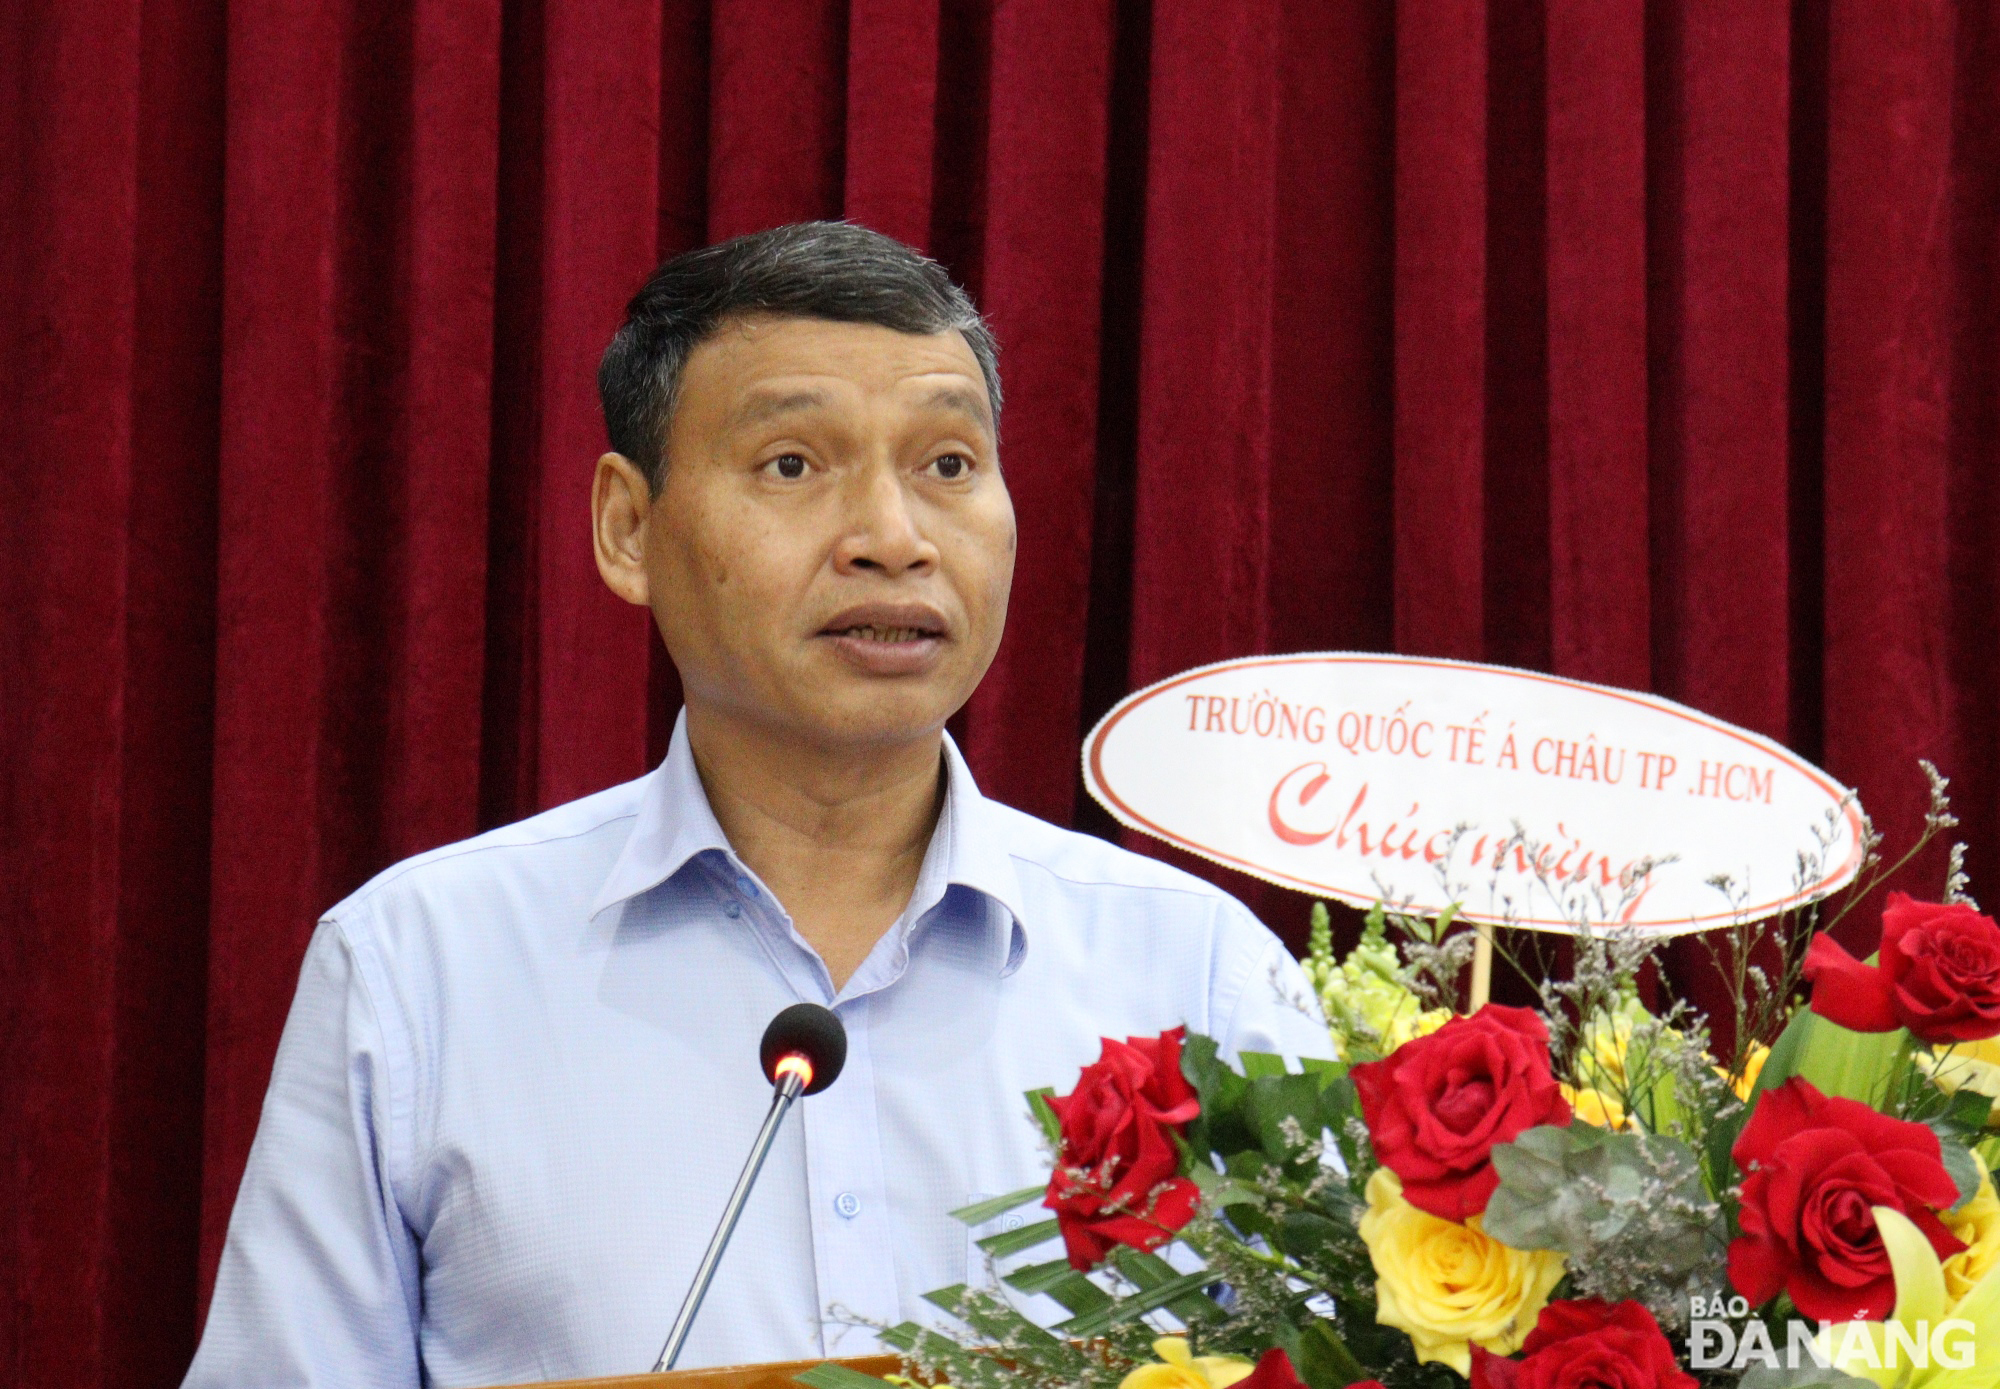 Permanent Vice Chairman of the municipal People's Committee Ho Ky Minh speaking at the event. Photo: HOANG HIEP